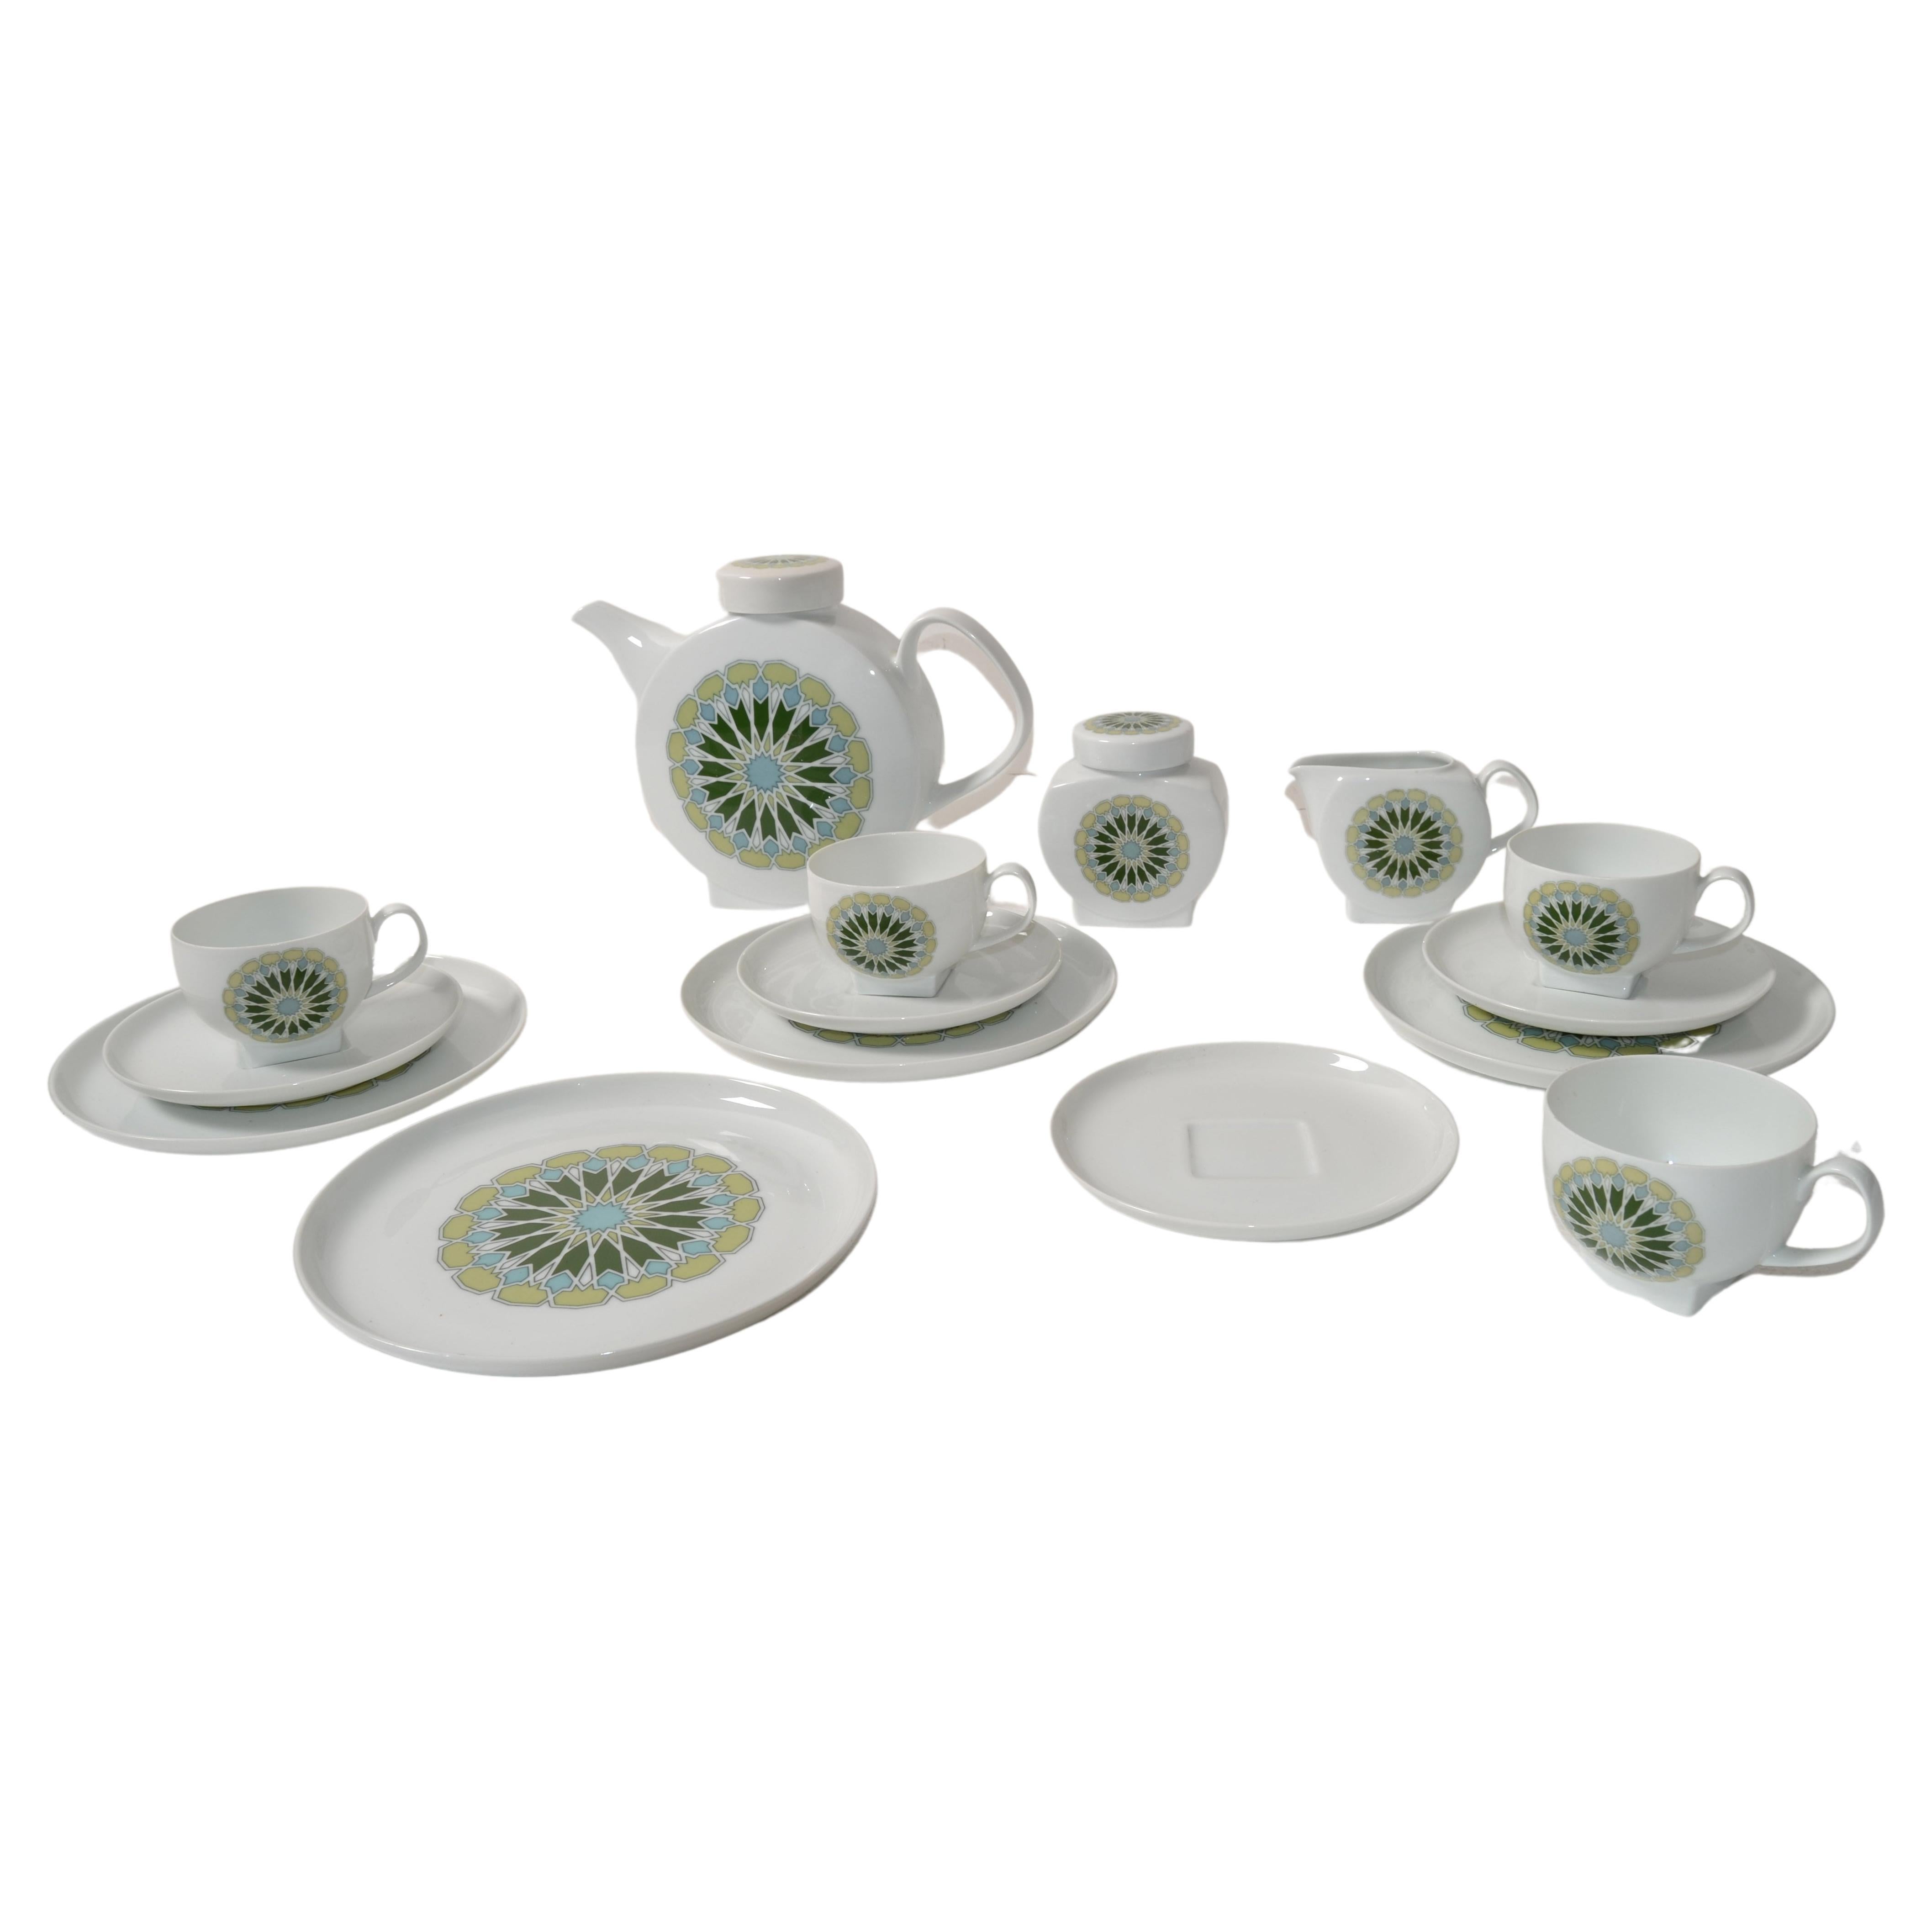 Vintage Op Art Porcelain Tea or Coffee Service for four place setting by Melitta Minden made in Germany circa 1980s.
Beautiful hues of green and turquoise flower motif on ivory white Porcelain.
Consisting of 4 coffee cups with saucers, 4 plates,